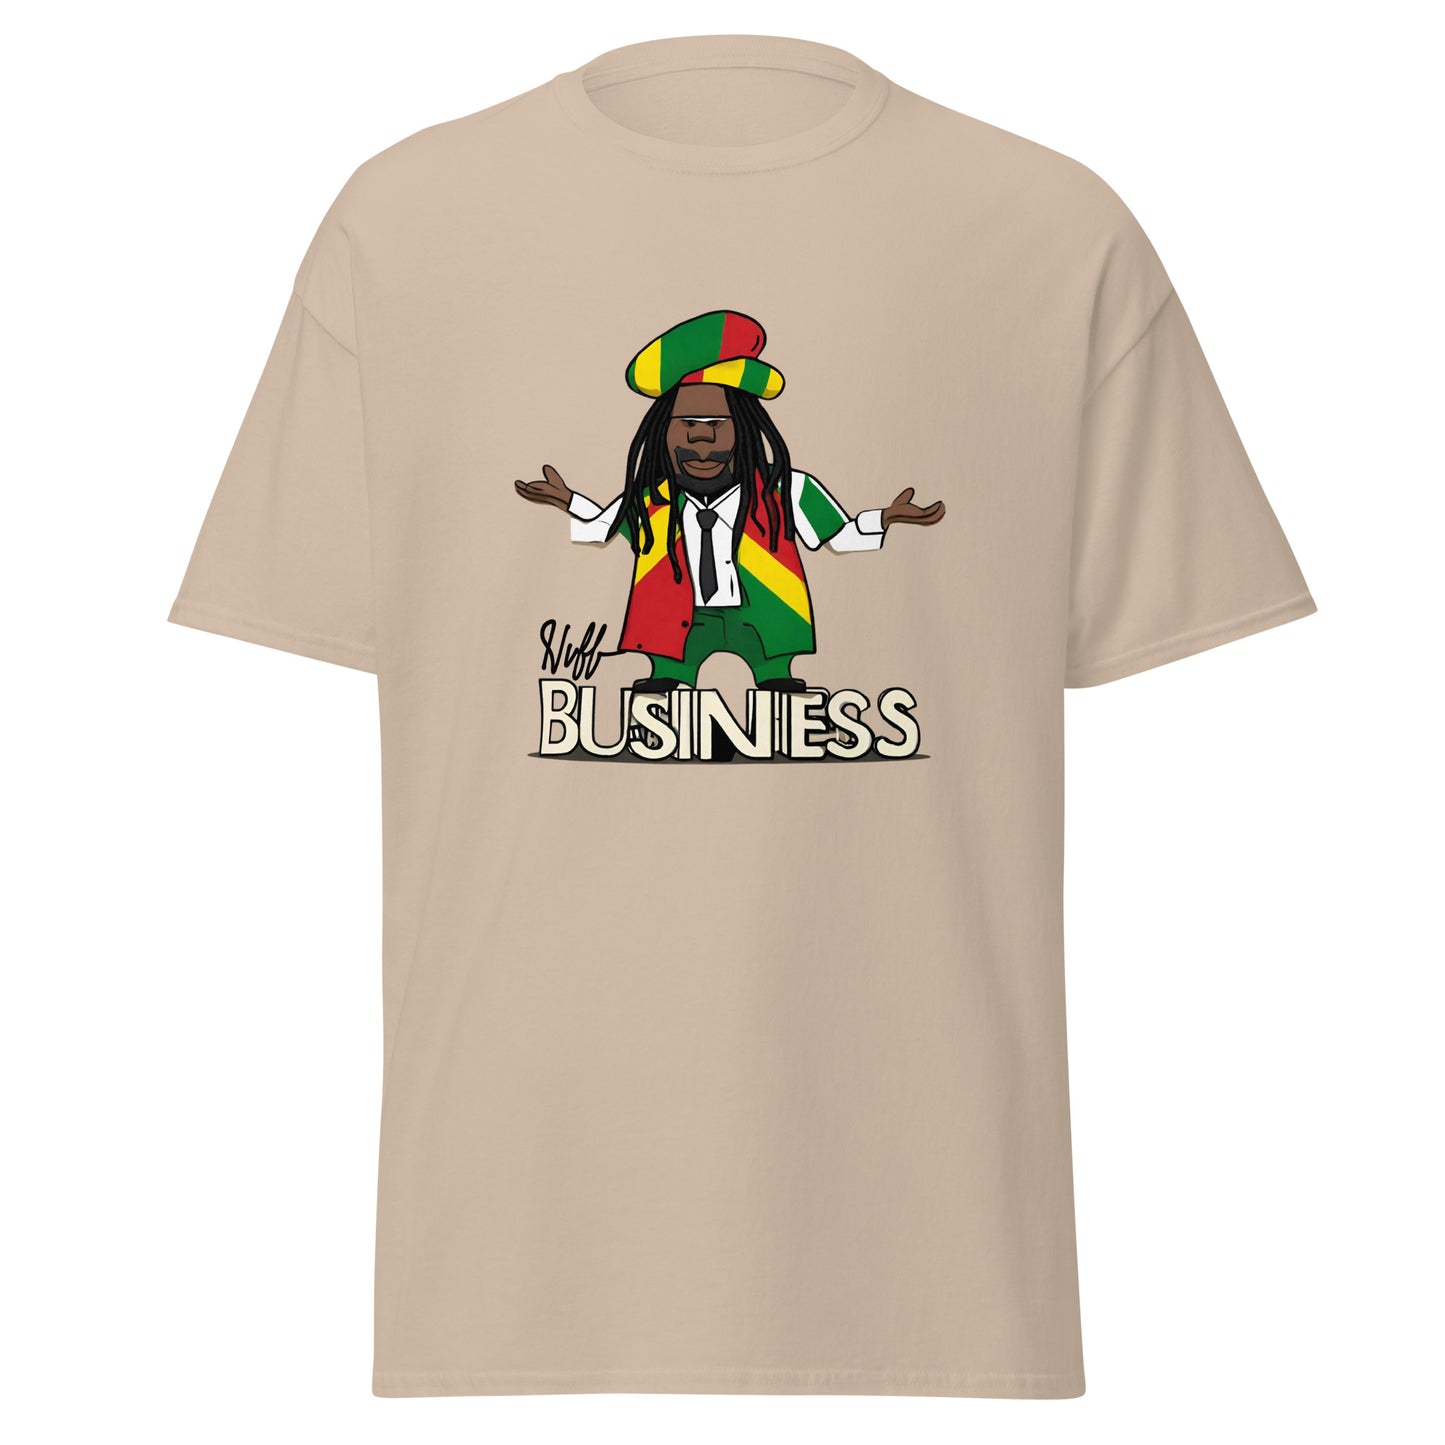 Stand on NUFF Business - Men's T-shirt (BN)